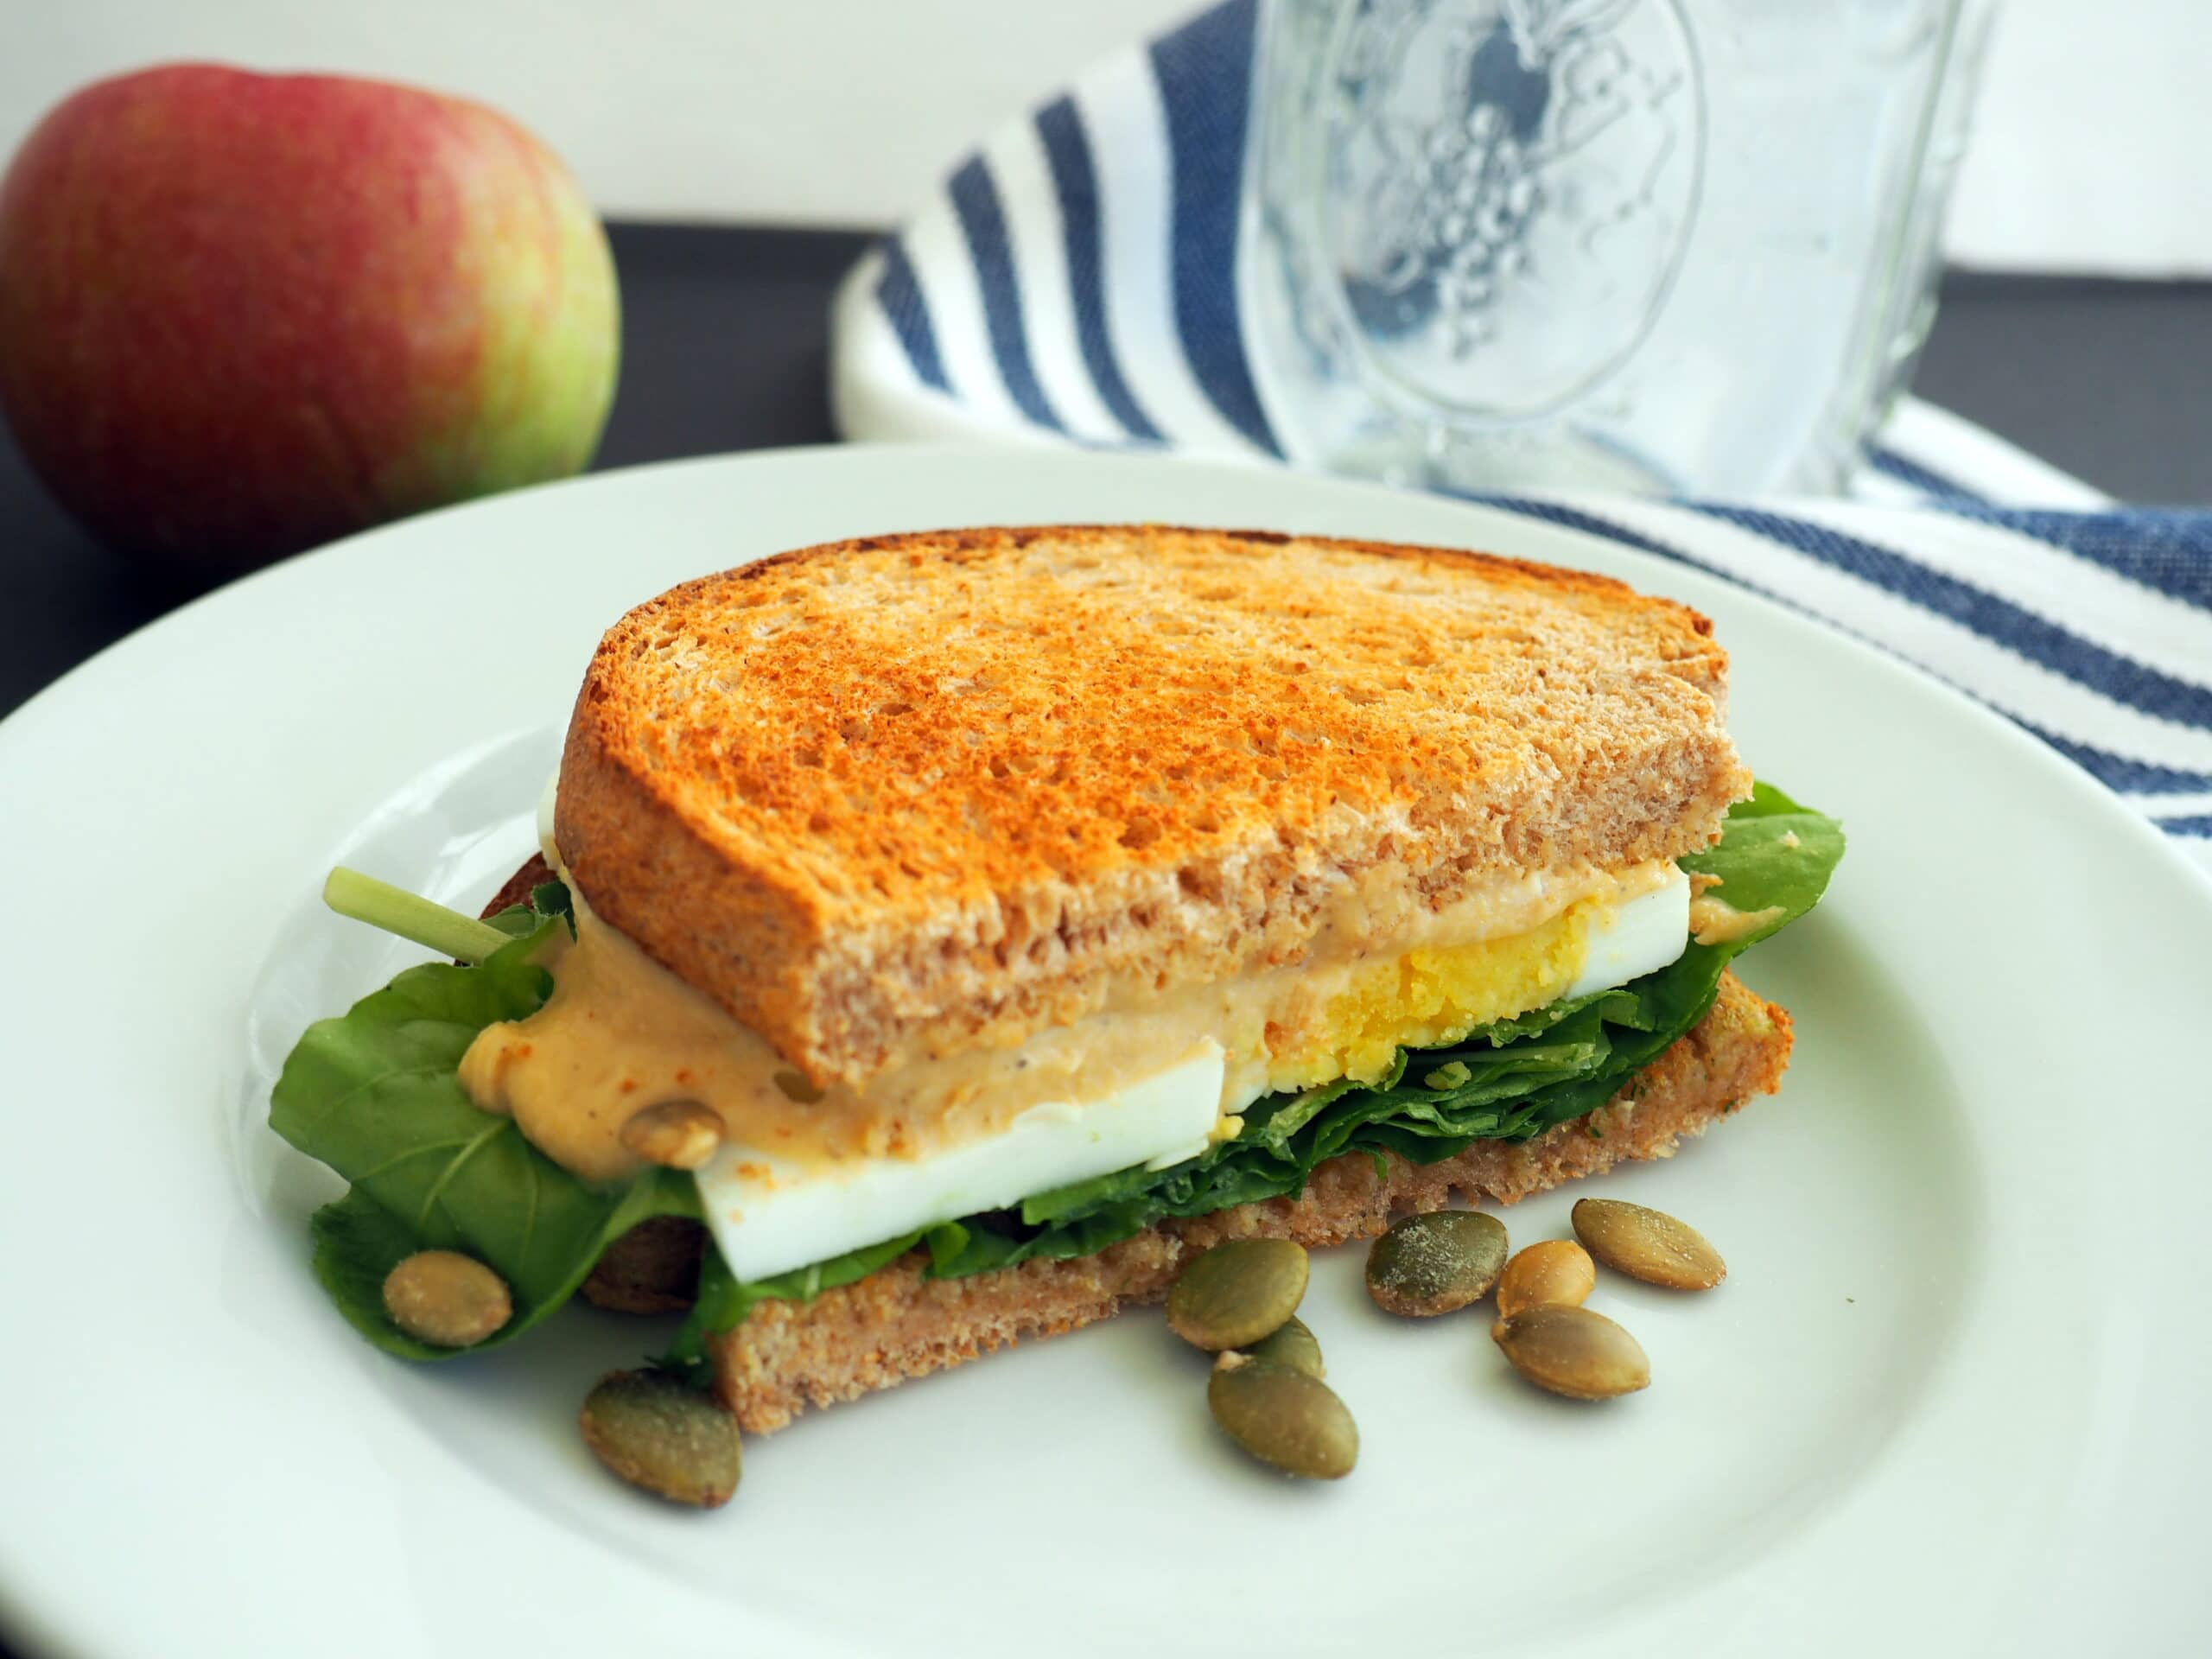 A simple, healthy way to liven up your egg sandwich! Simply add some peppery arugula and top with Sabra's delicious sea salt & cracked pepper hummus spread. Eat it like the Nordic, open-faced, or top it with another piece of bread for a classic lunch-box sandwich. Yum! Dairy-free, vegetarian.